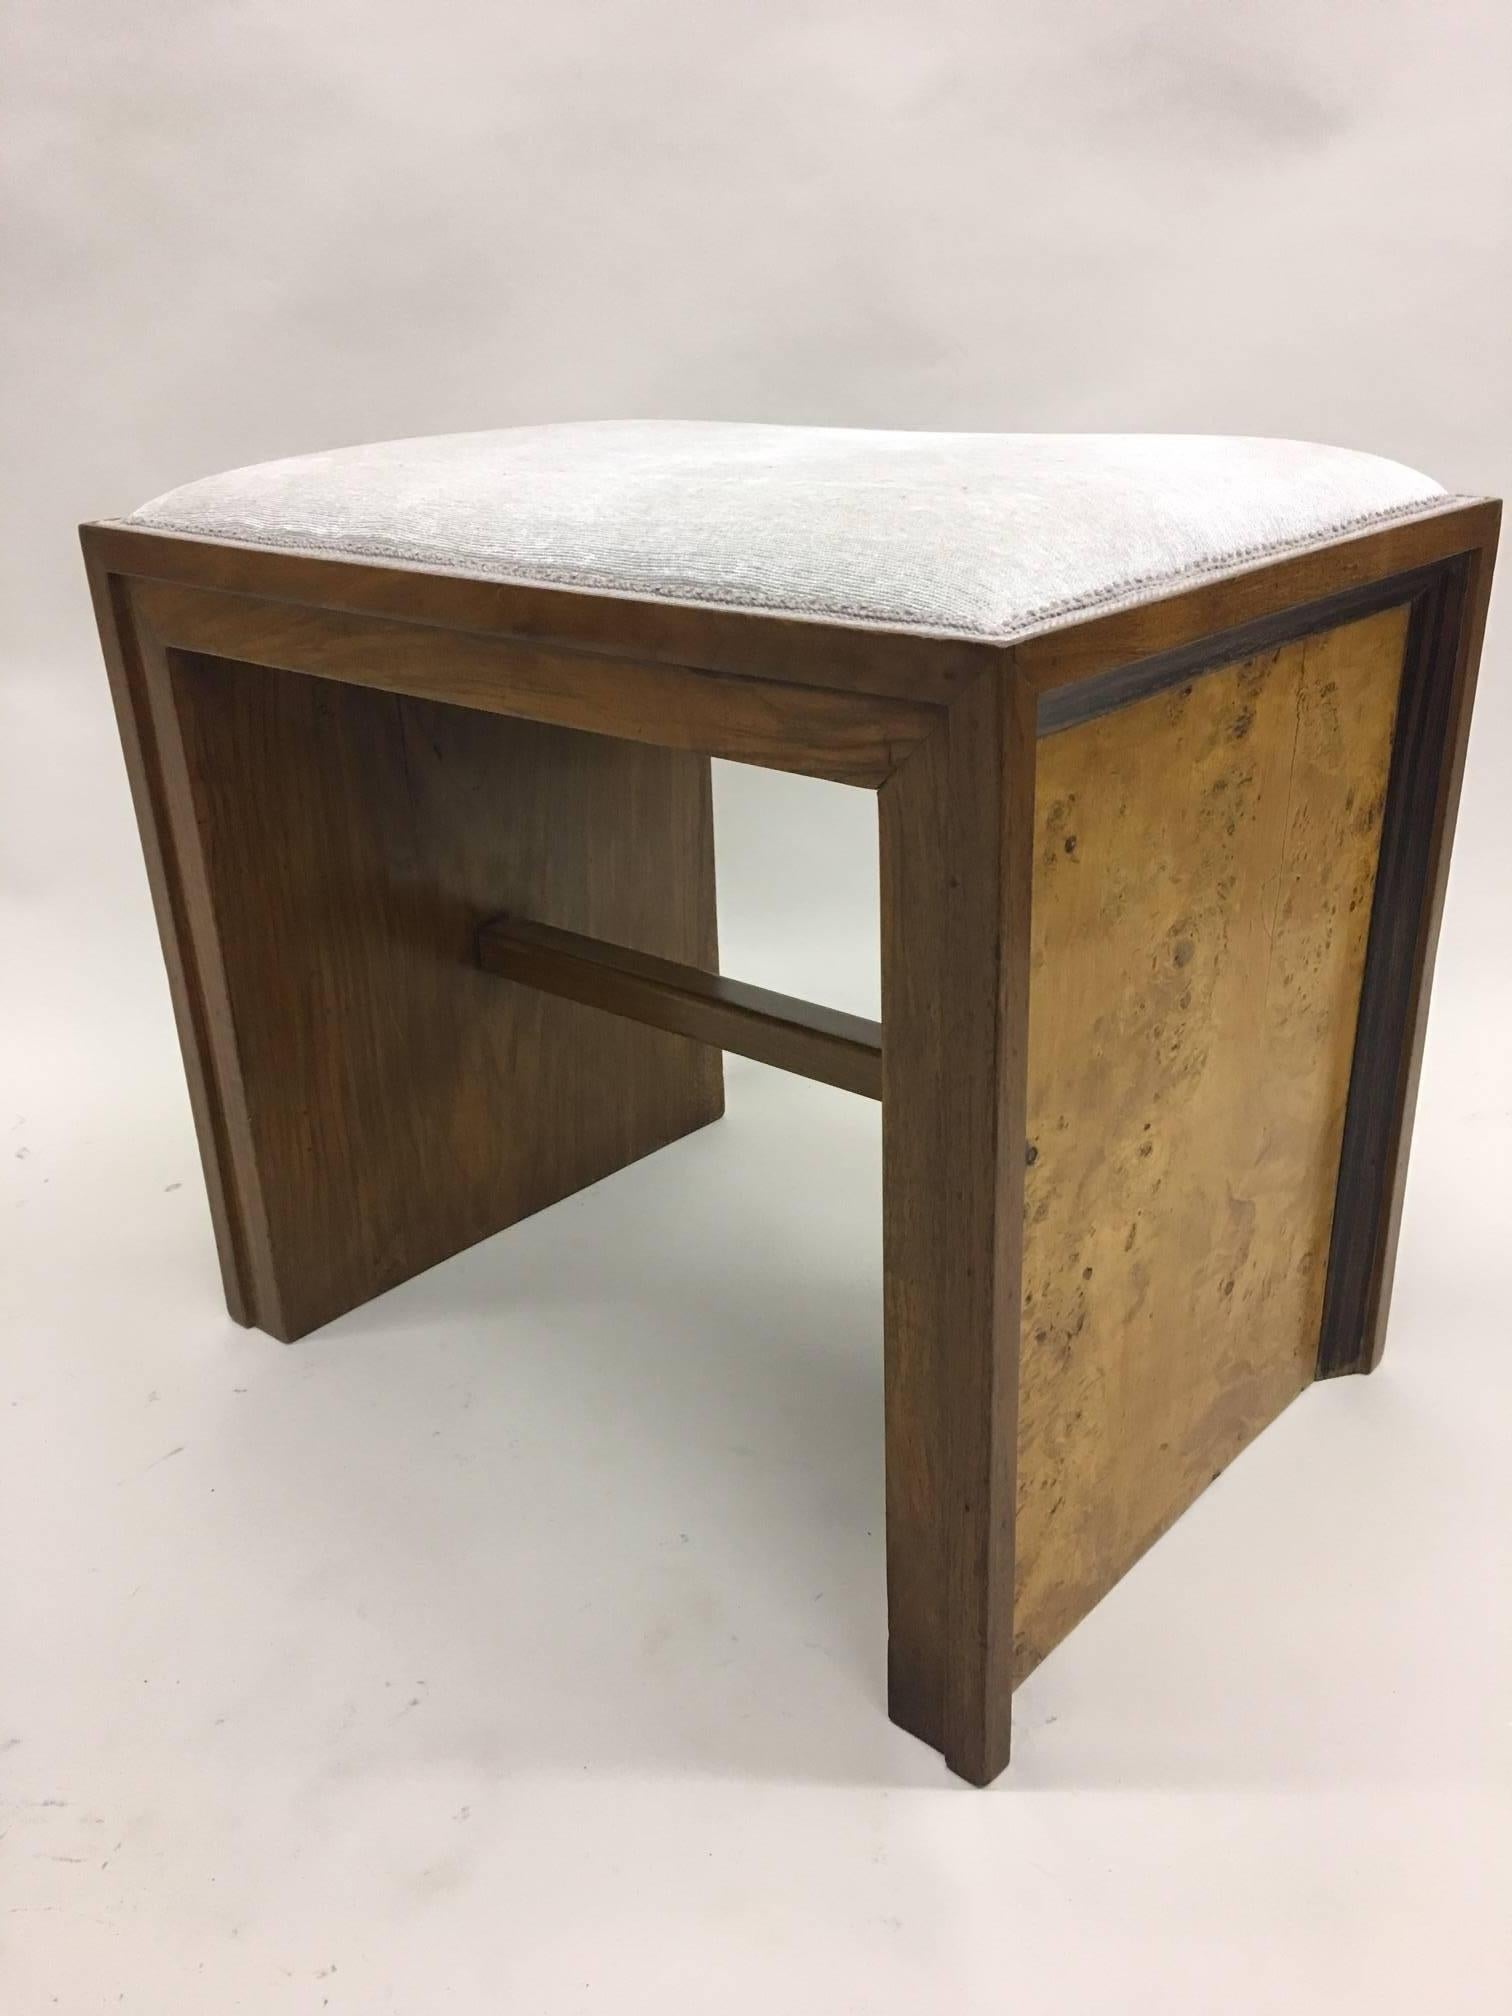 Elegant pair of Italian Mid-Century benches or stools by a Italian Rationalist architect, circa 1930. The pieces feature a sober rectangular design but are countered with an elegant combination of various woods including white birch, elm and